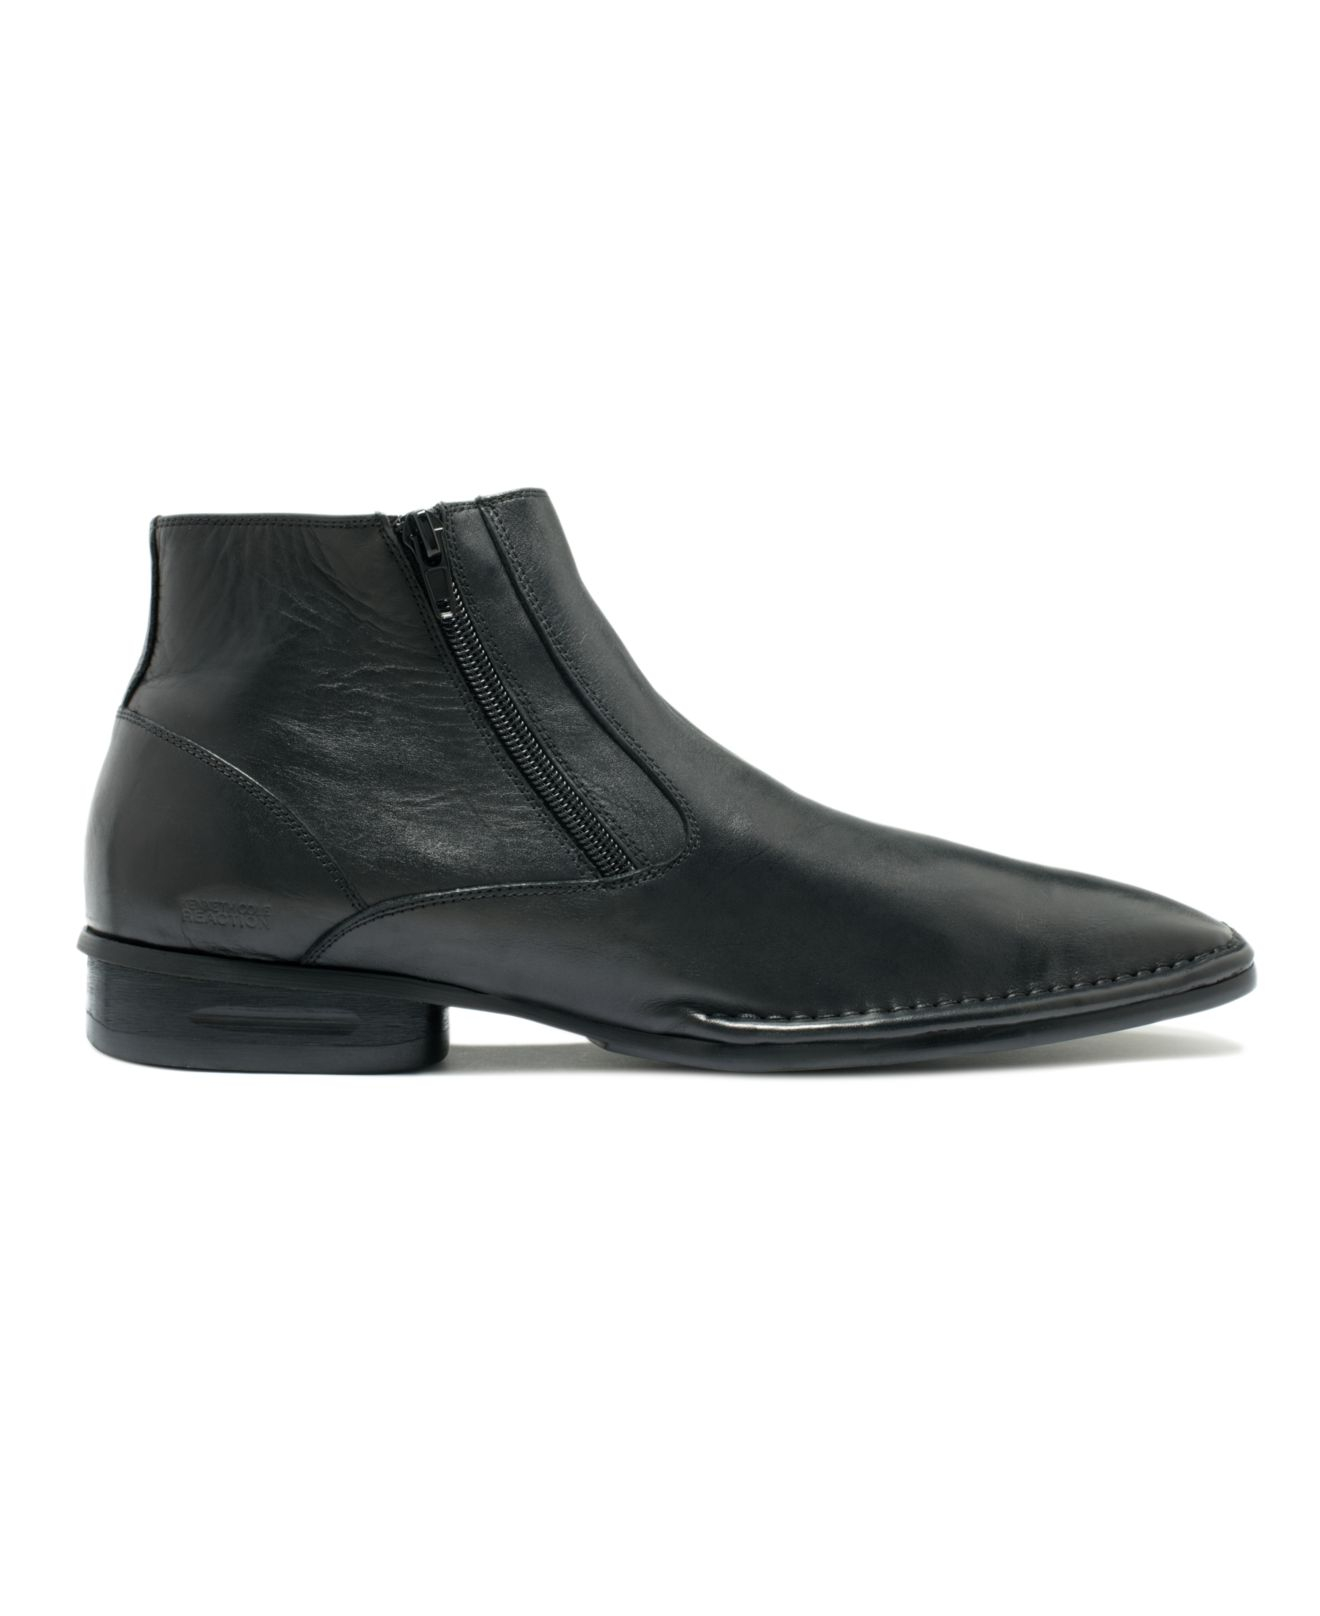 Lyst - Kenneth Cole Reaction Central Plan Double Zip Boots in Black for Men